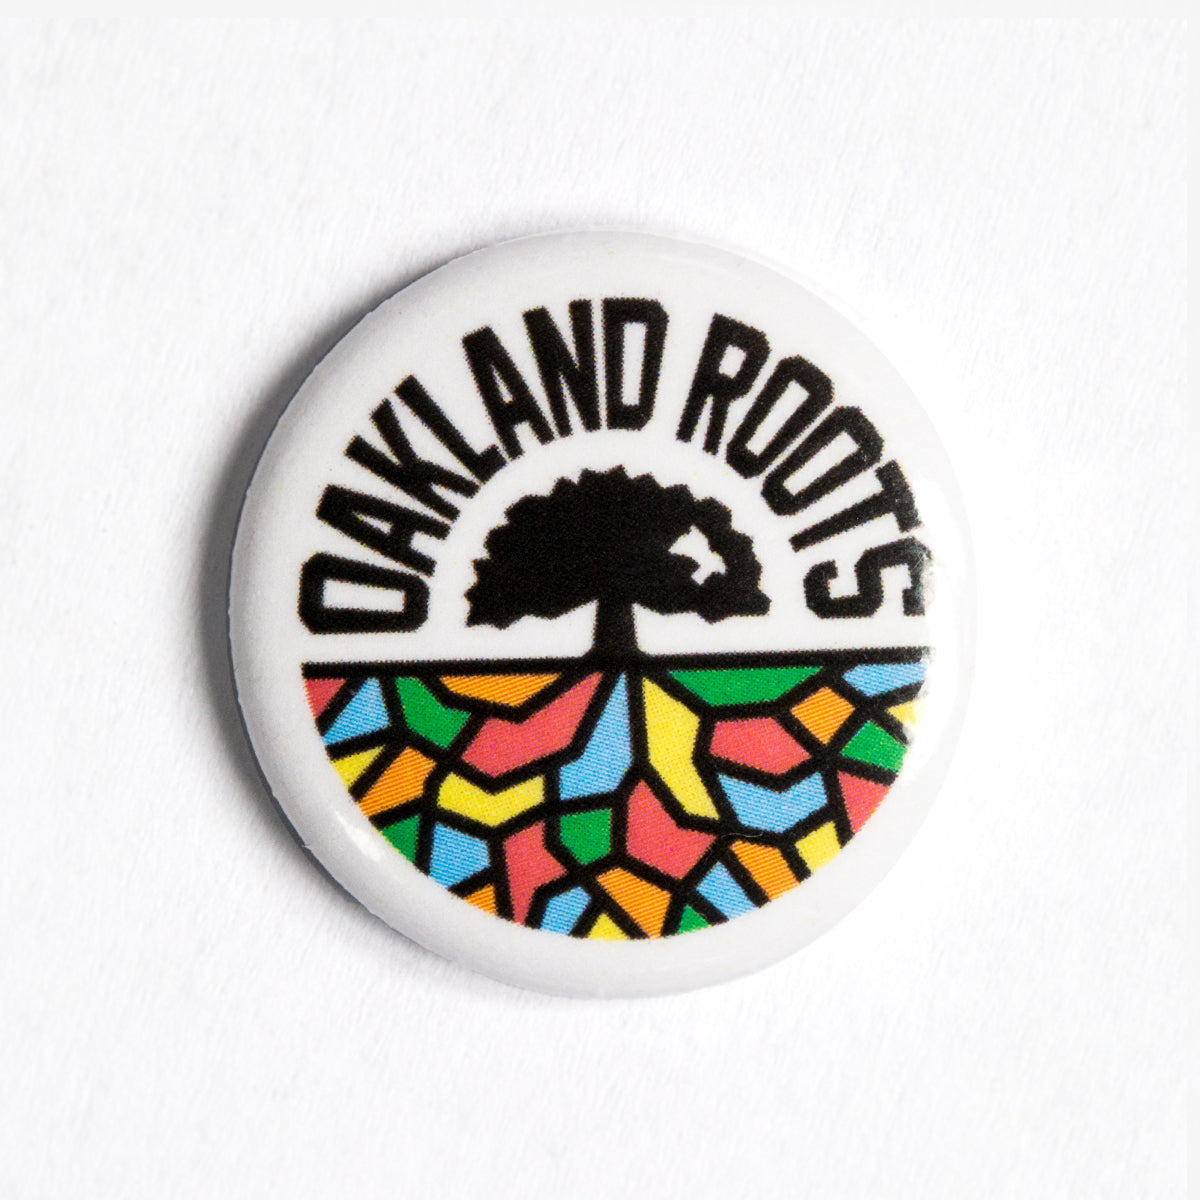 Oakland Roots full-color logo crest on a lapel pin.